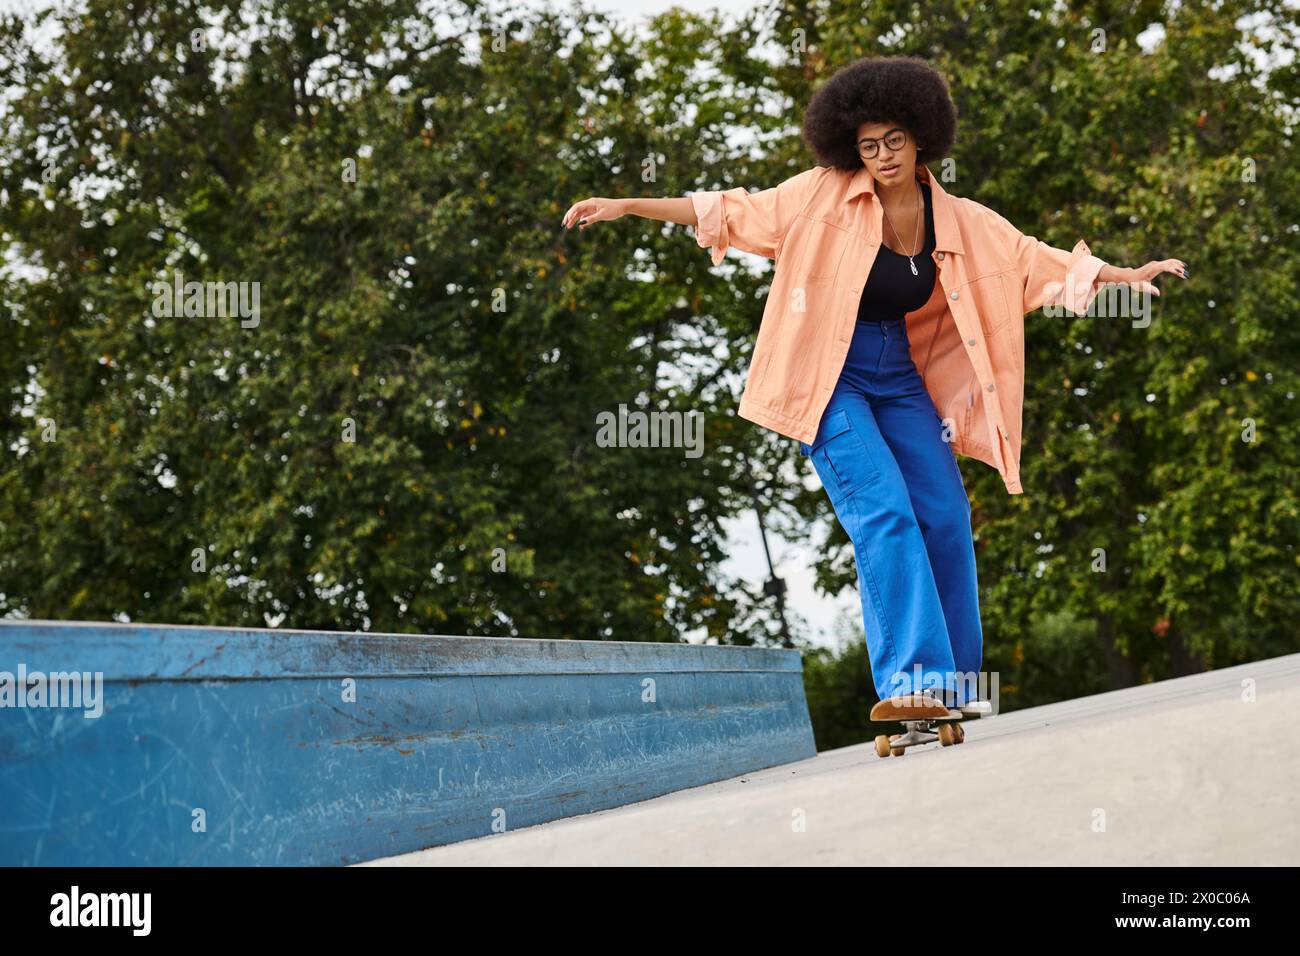 A young African American woman with curly hair skillfully riding a skateboard down the side of a ramp in a vibrant skate park. Stock Photo